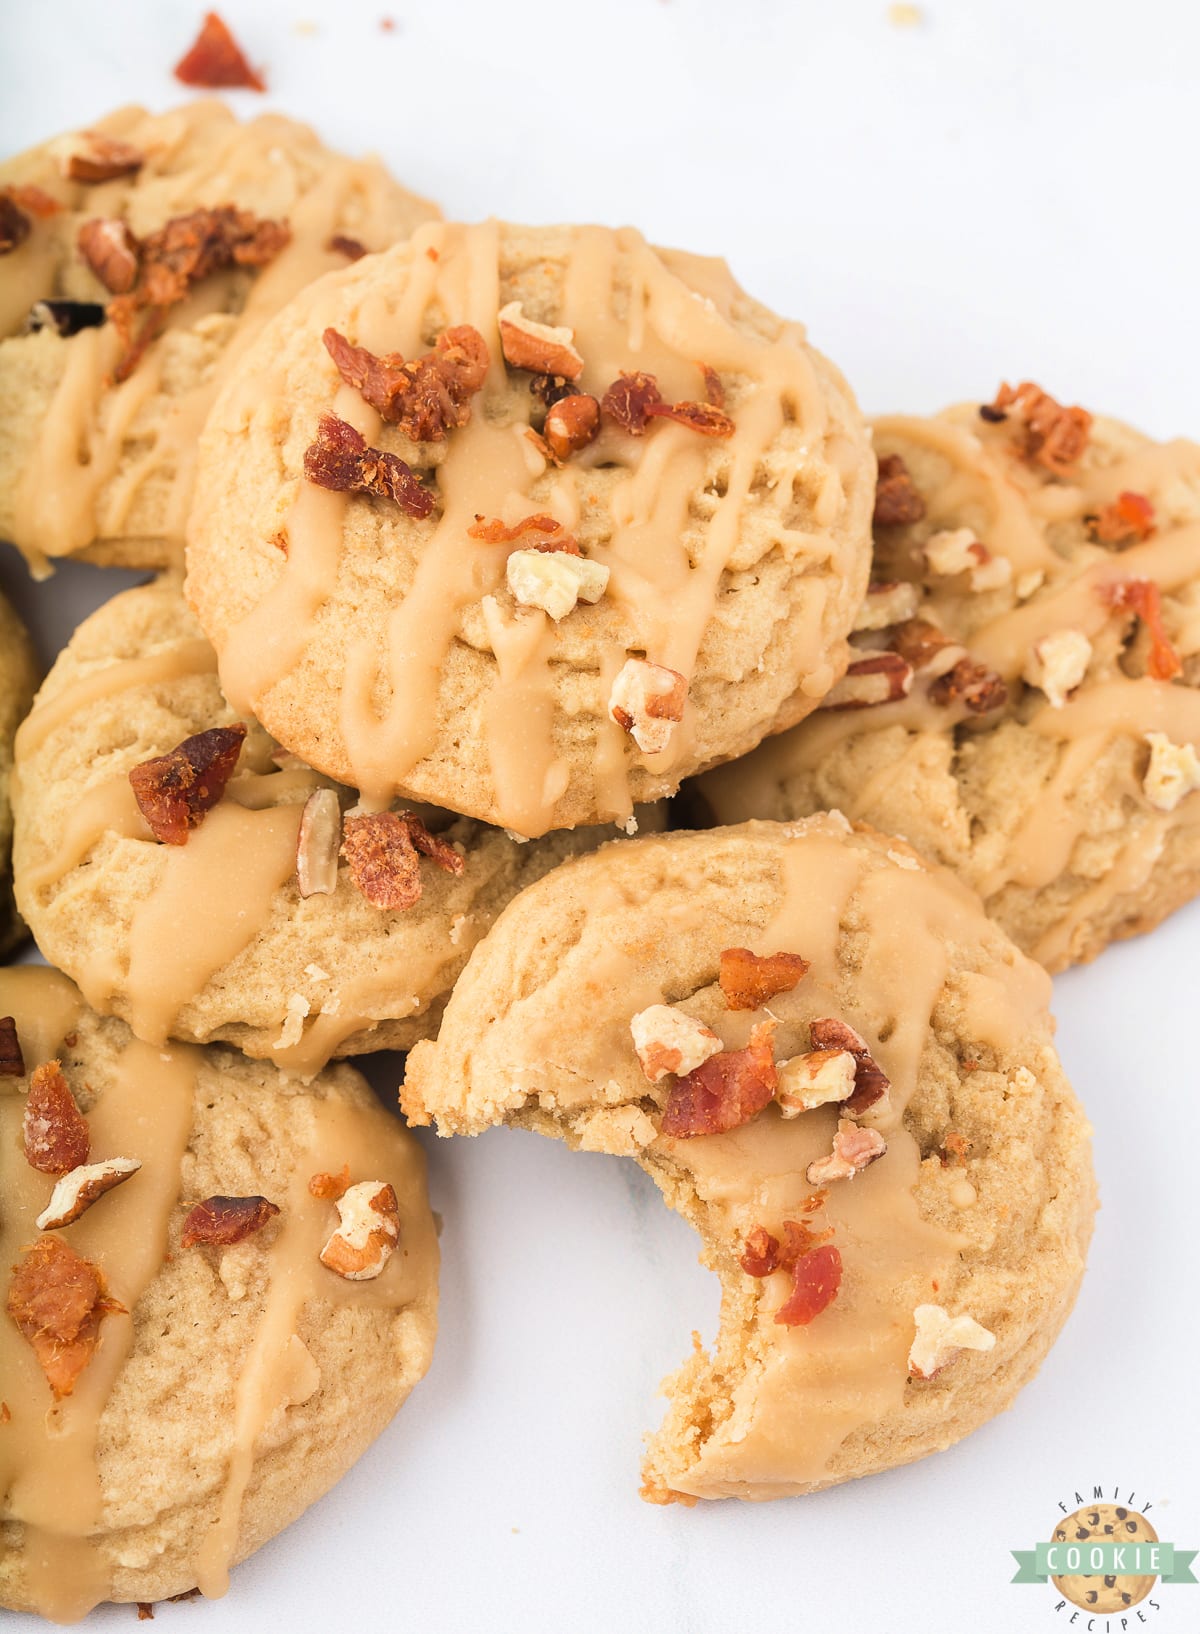 Cookies made with bacon grease and maple syrup.